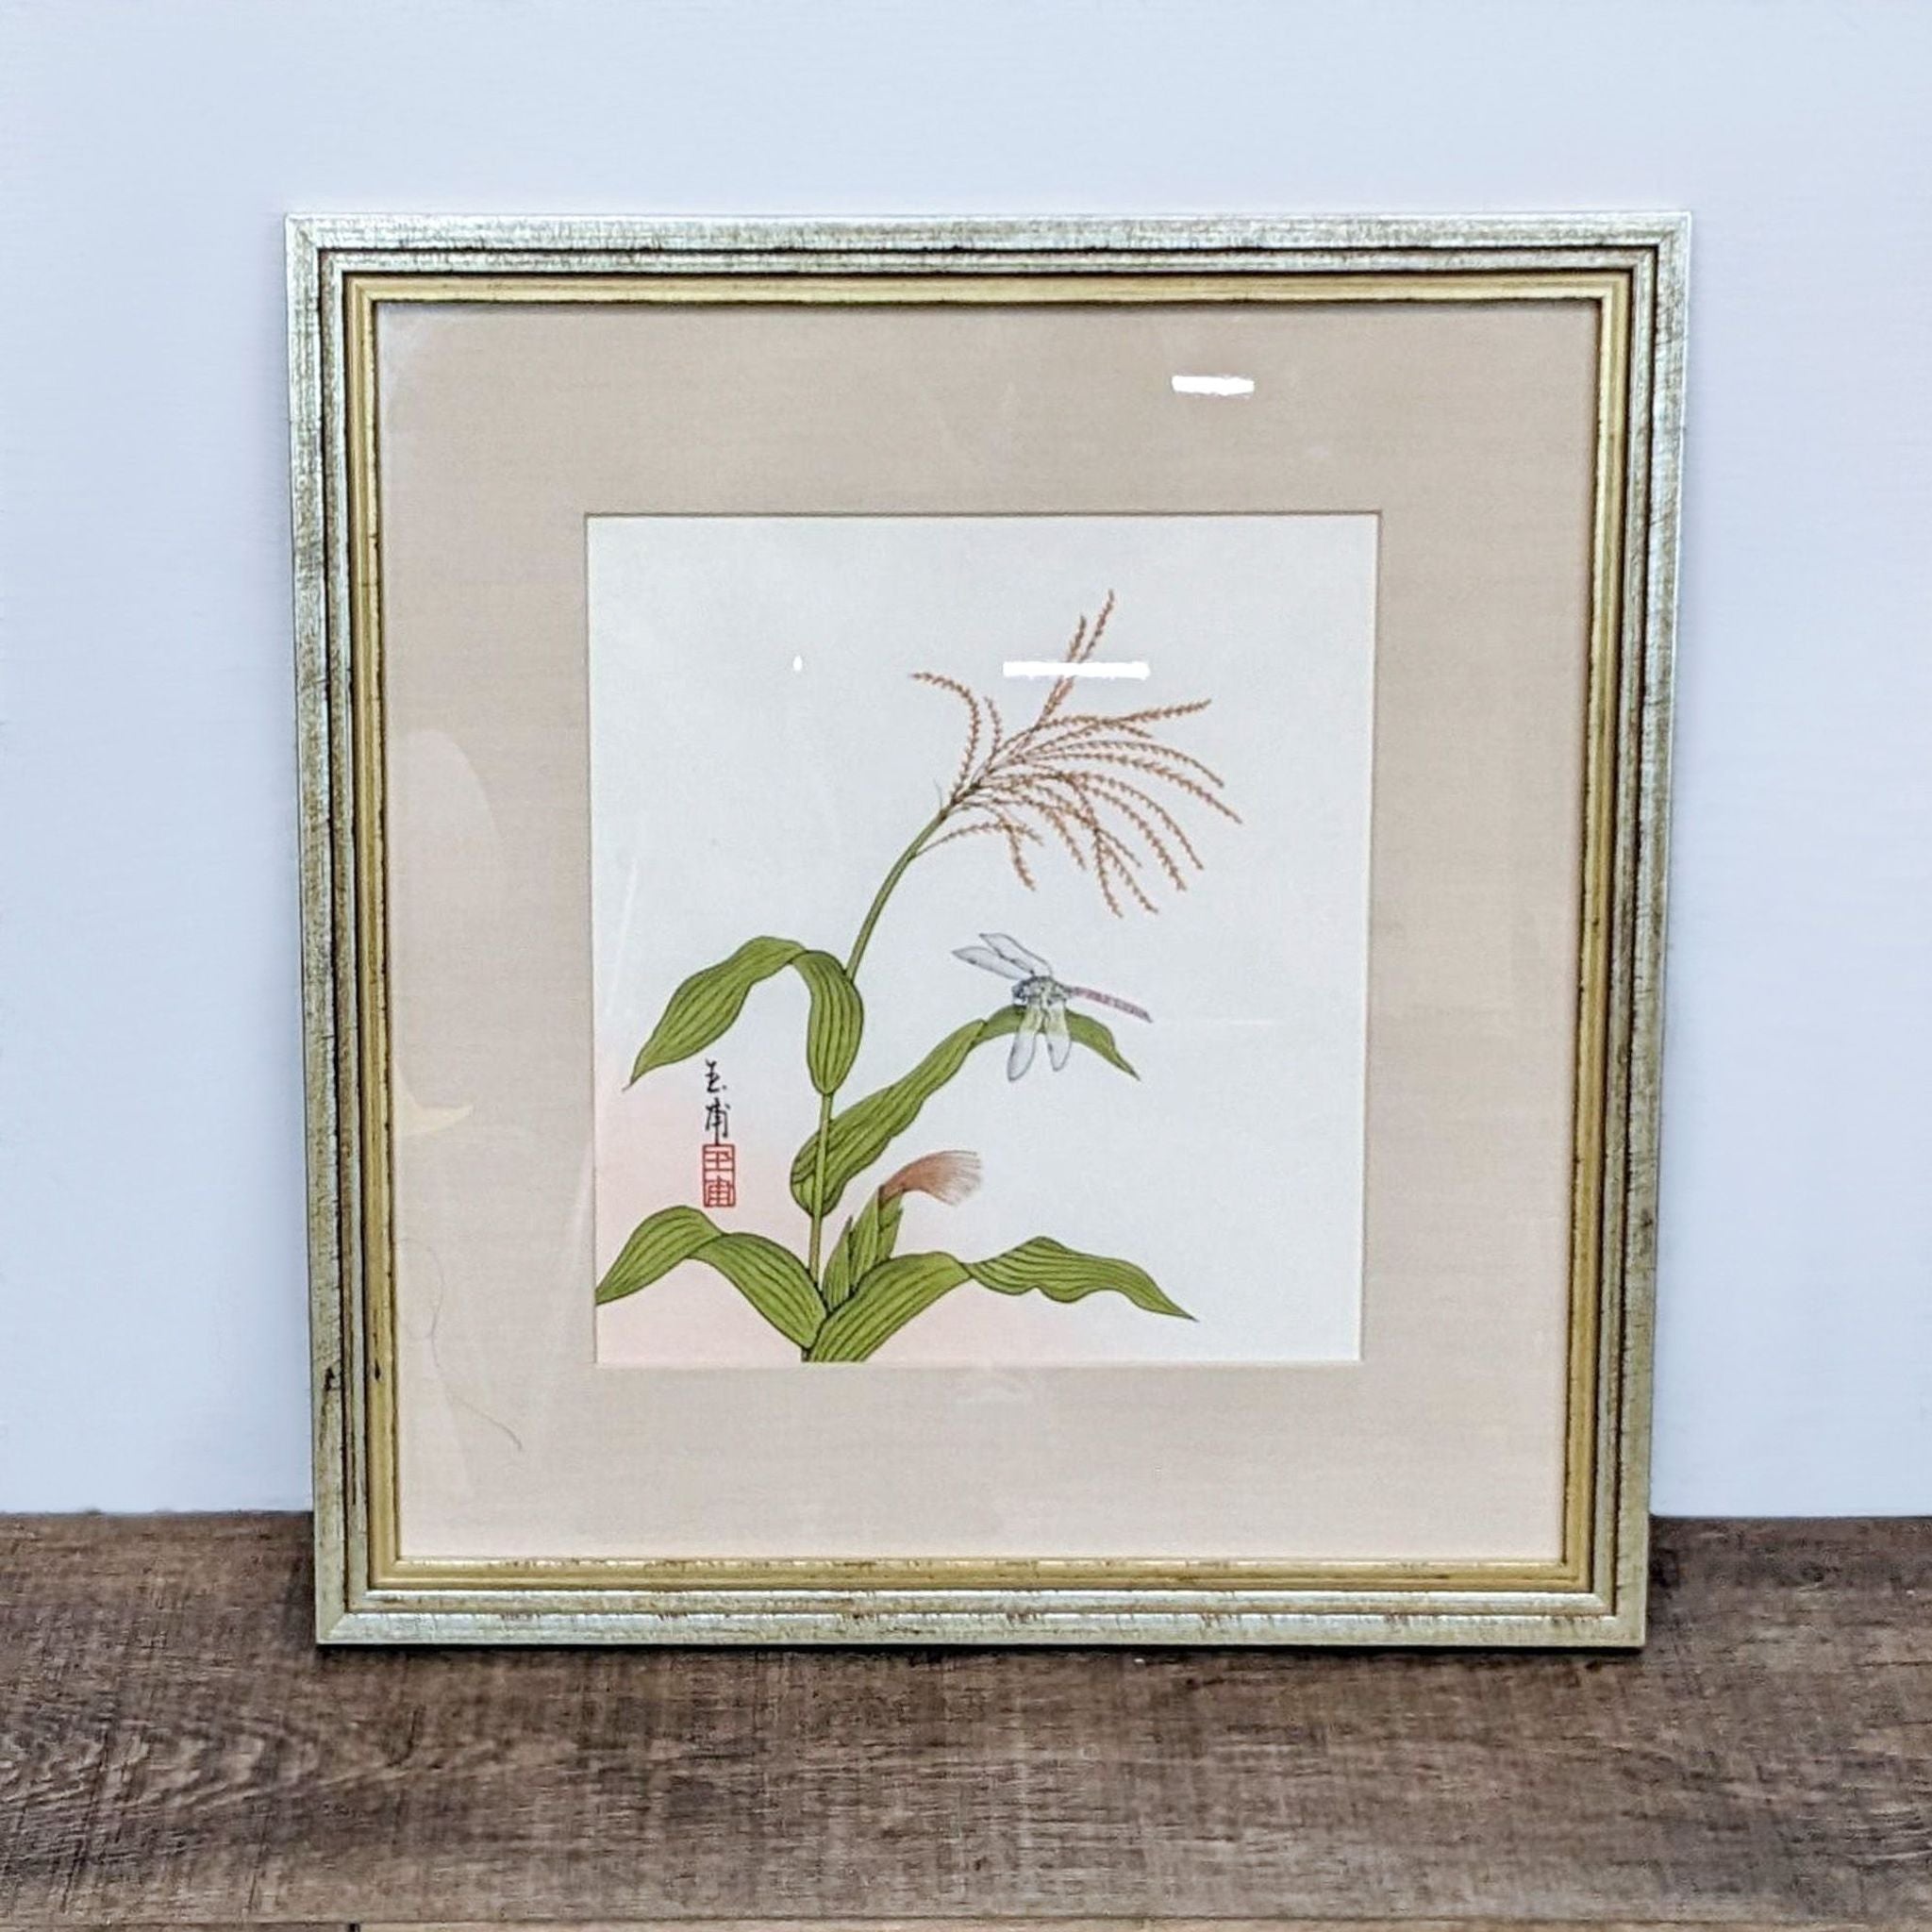 Botanical print with delicate plant and dragonfly, featuring Asian calligraphy, encased in a gold frame by Reperch.